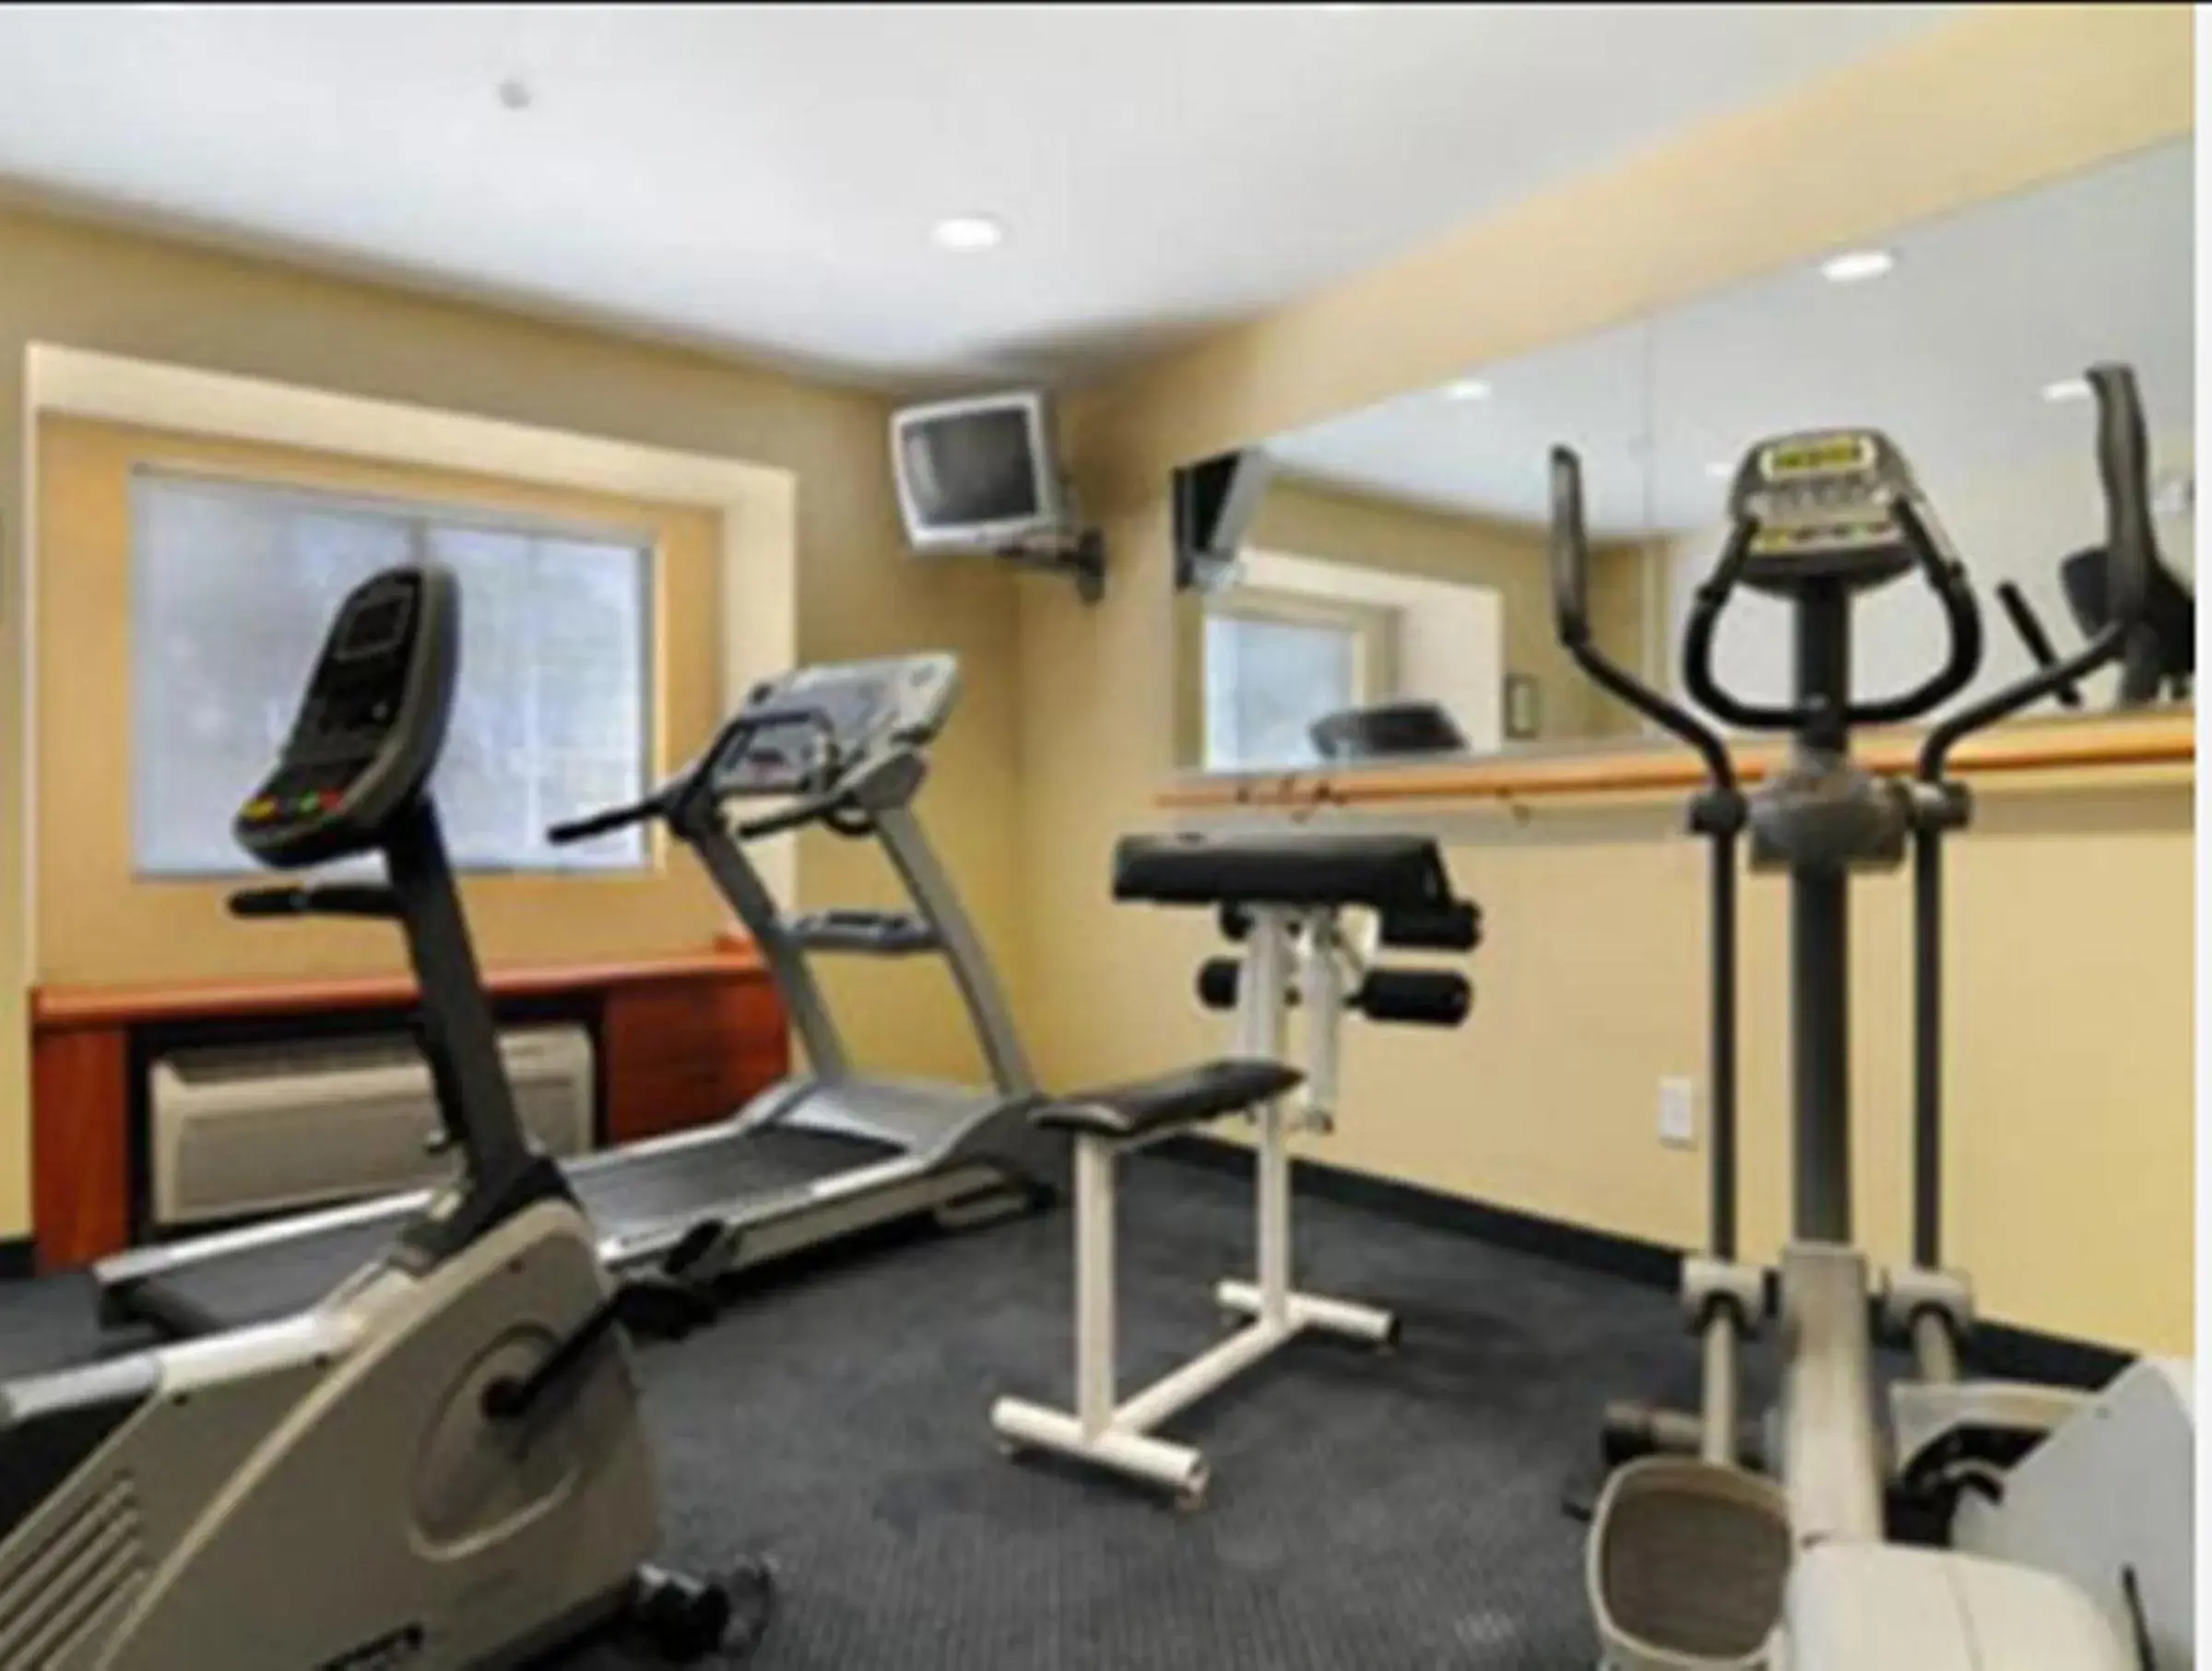 Fitness centre/facilities, Fitness Center/Facilities in Microtel Inn & Suites Huntsville